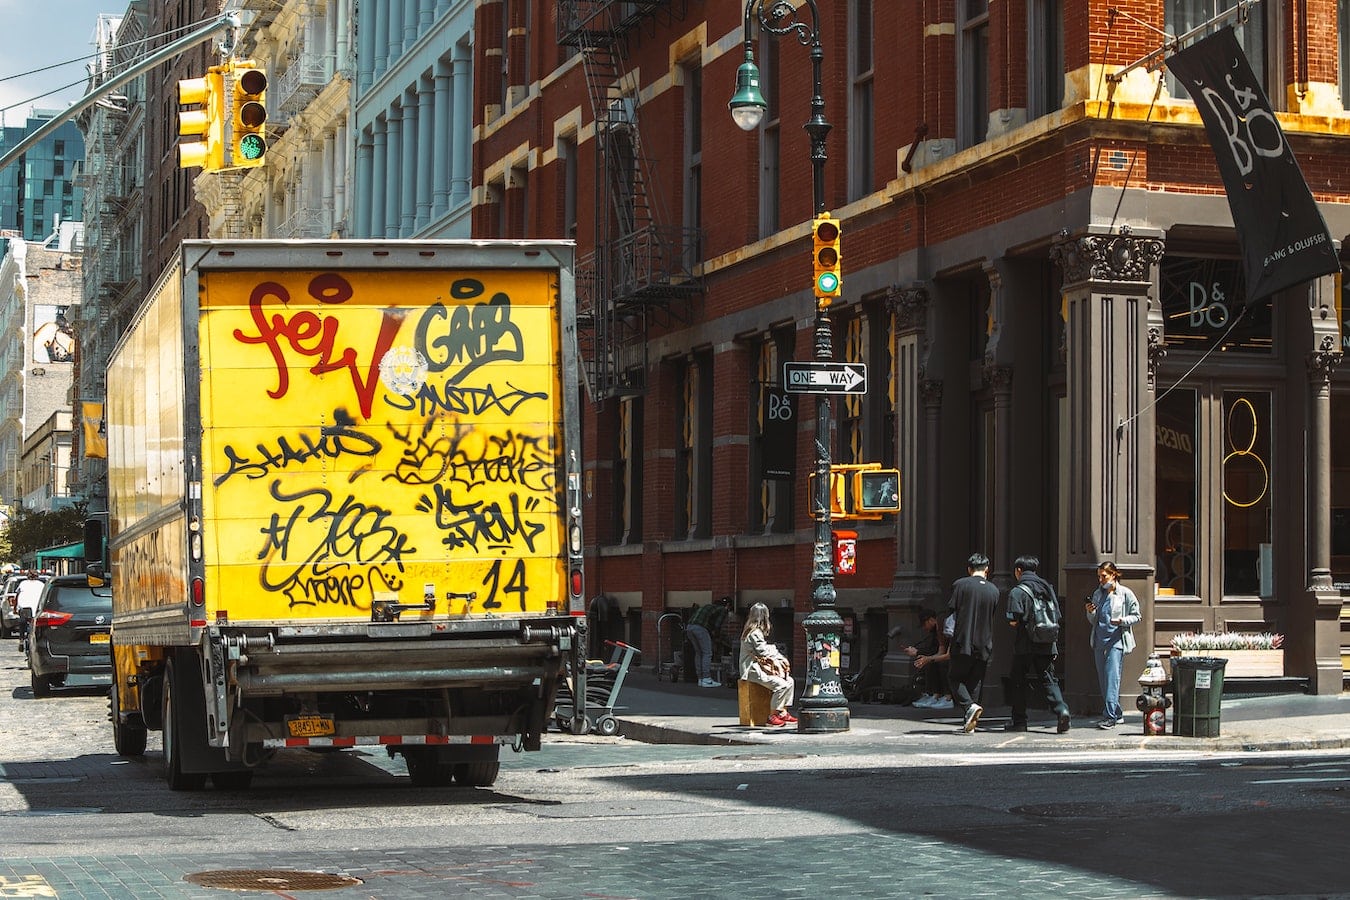 Commercial truck in NYC